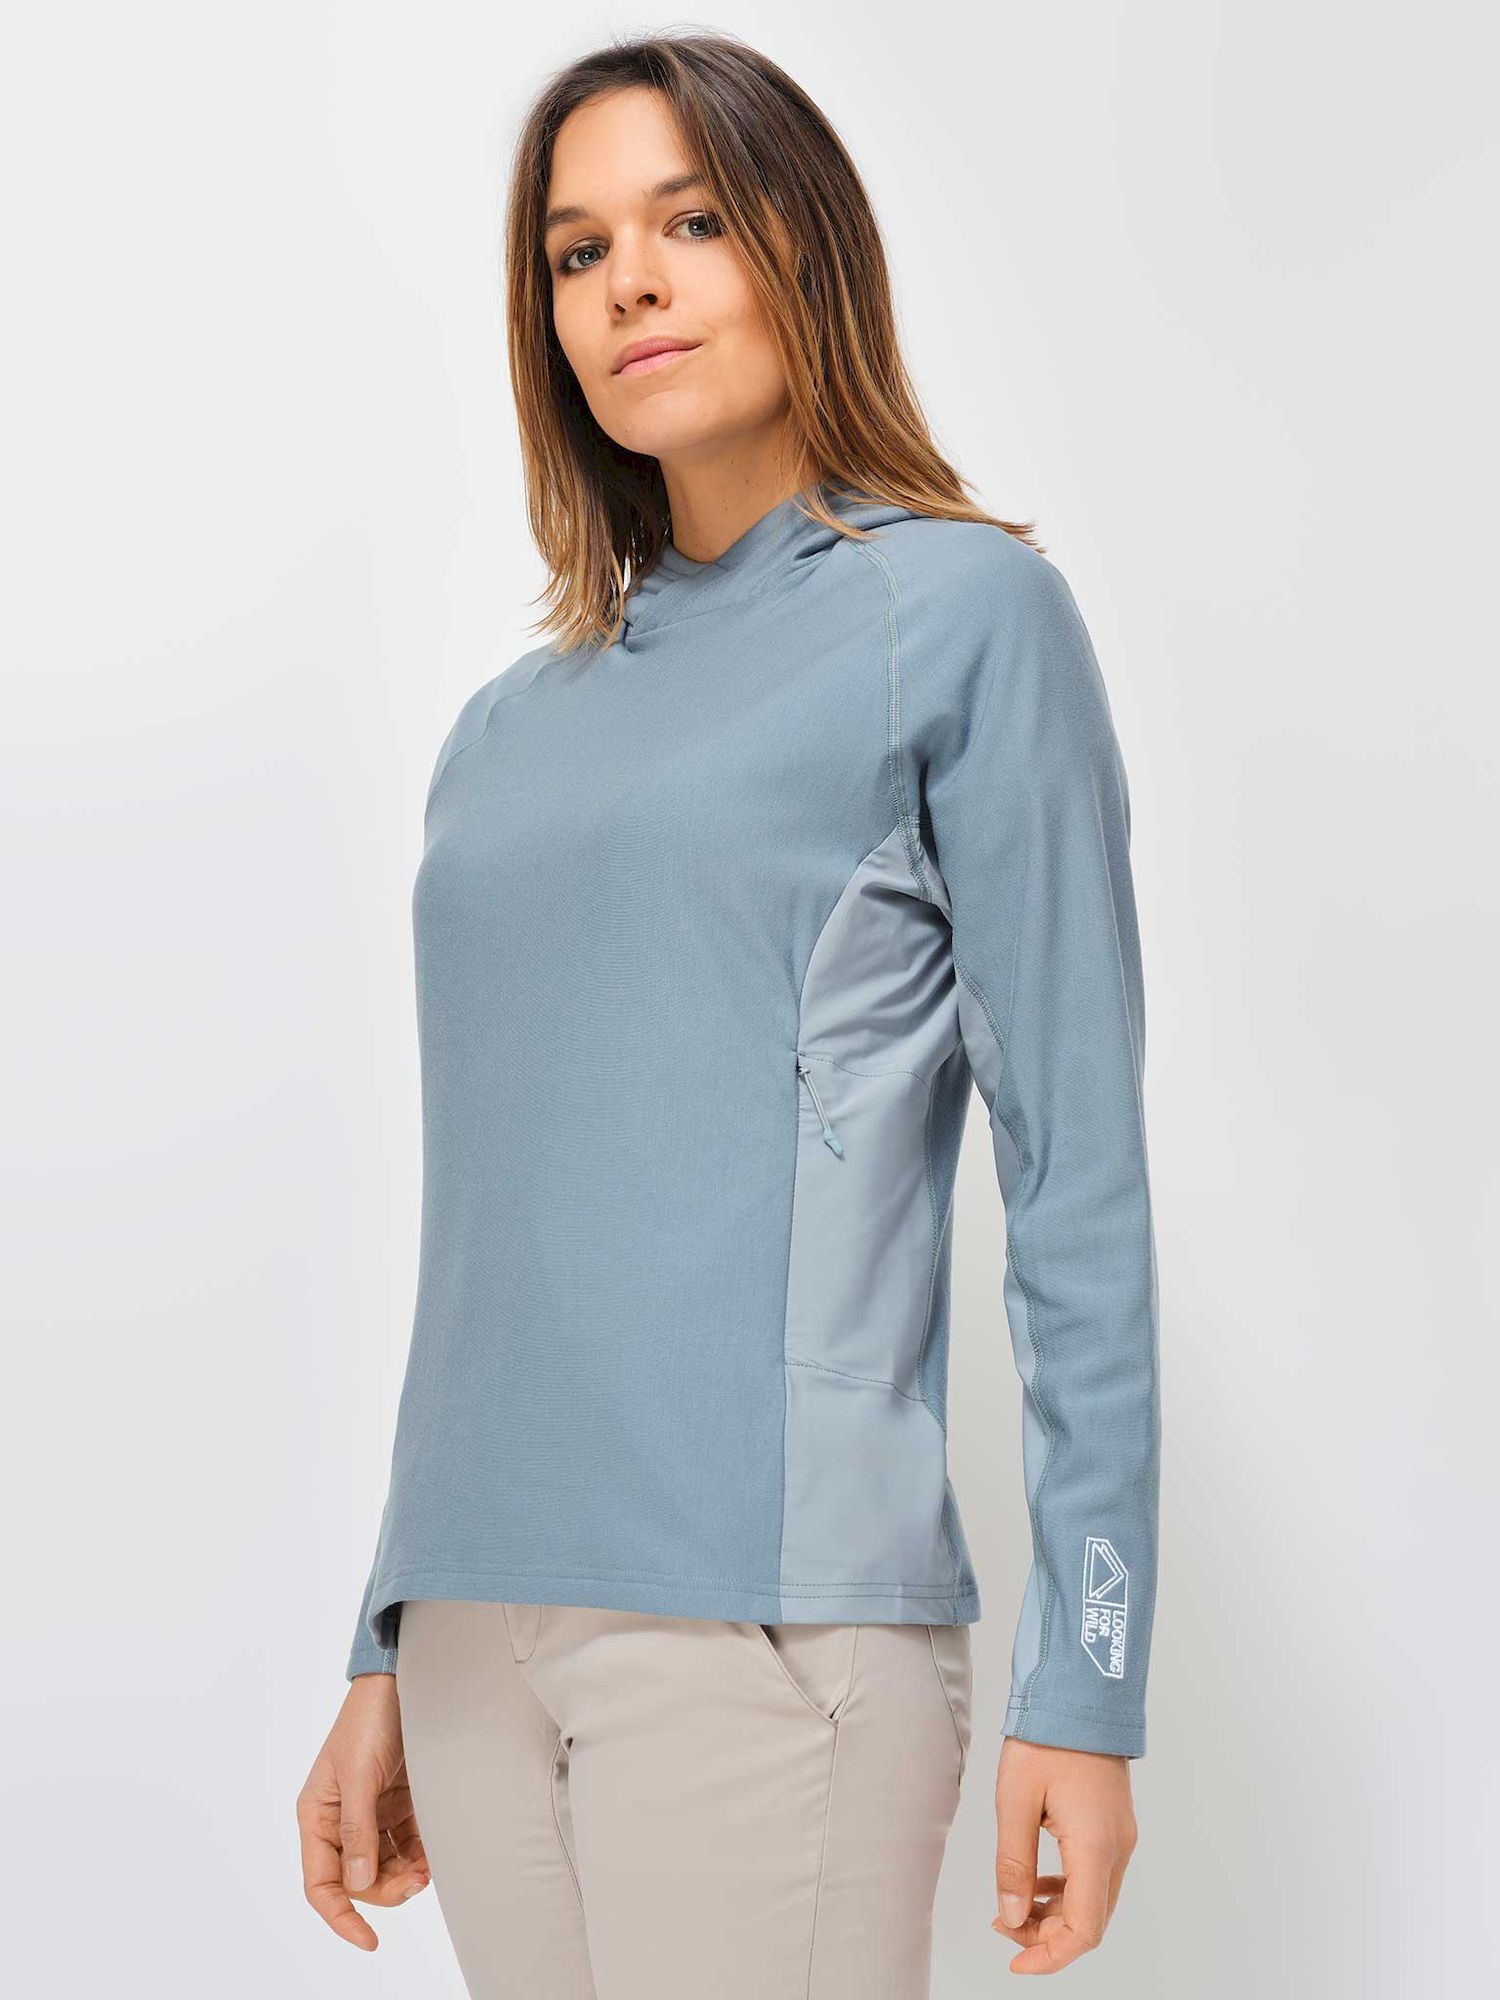 Looking For Wild Central Park - Sweat à capuche femme | Hardloop